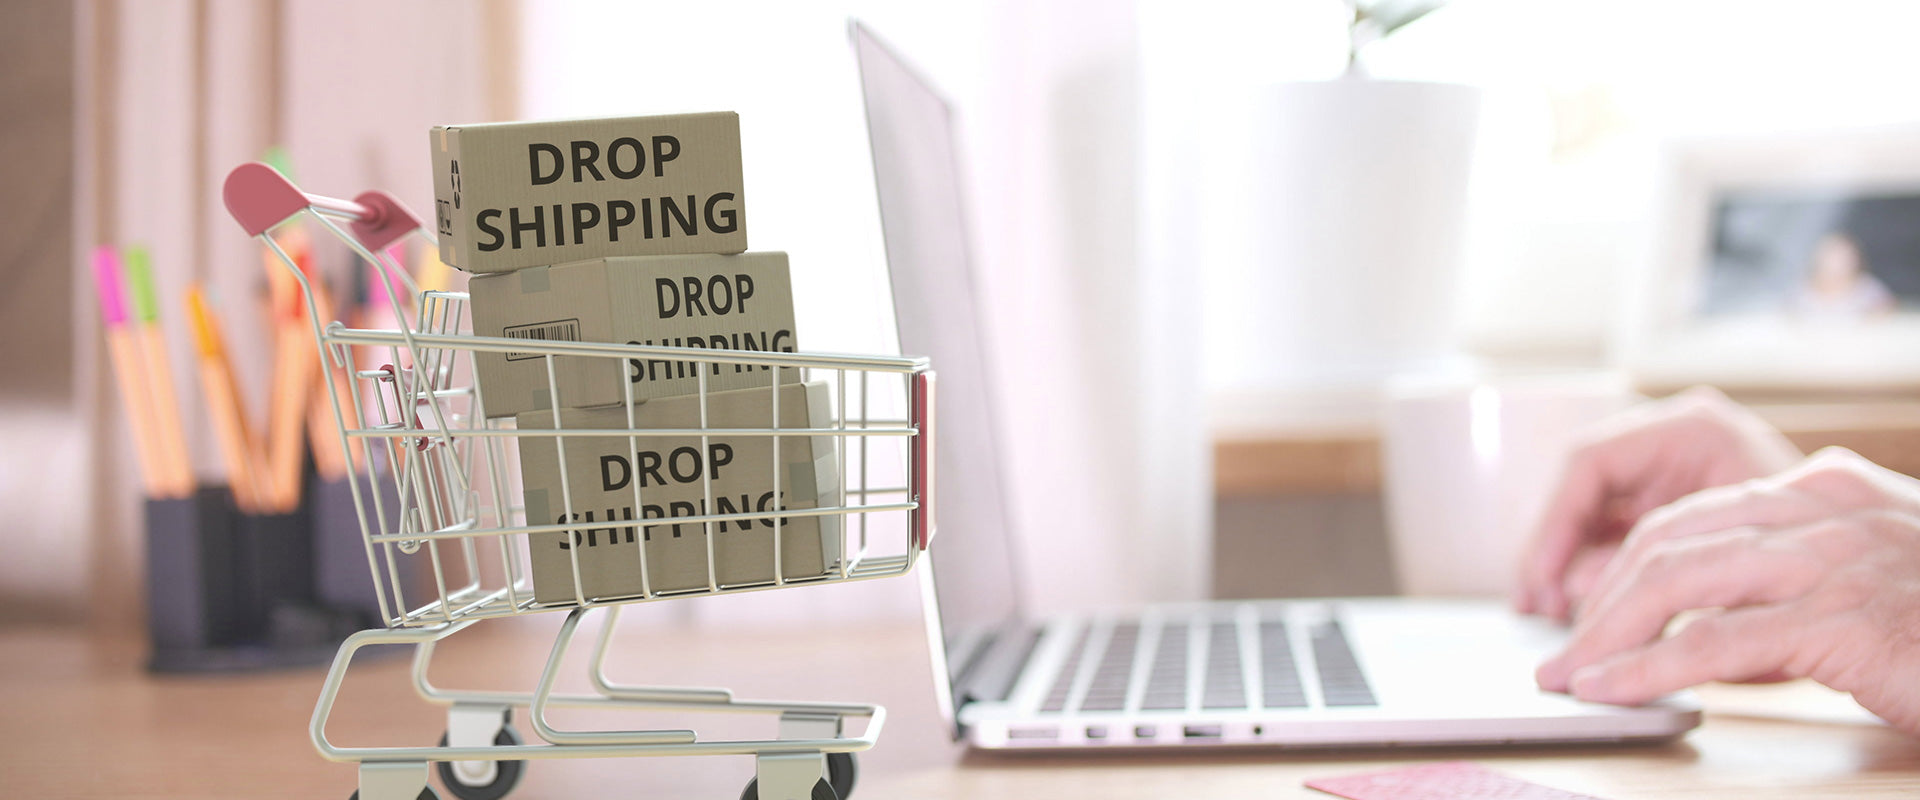 Finding A Successful Online Dropshipping Niche